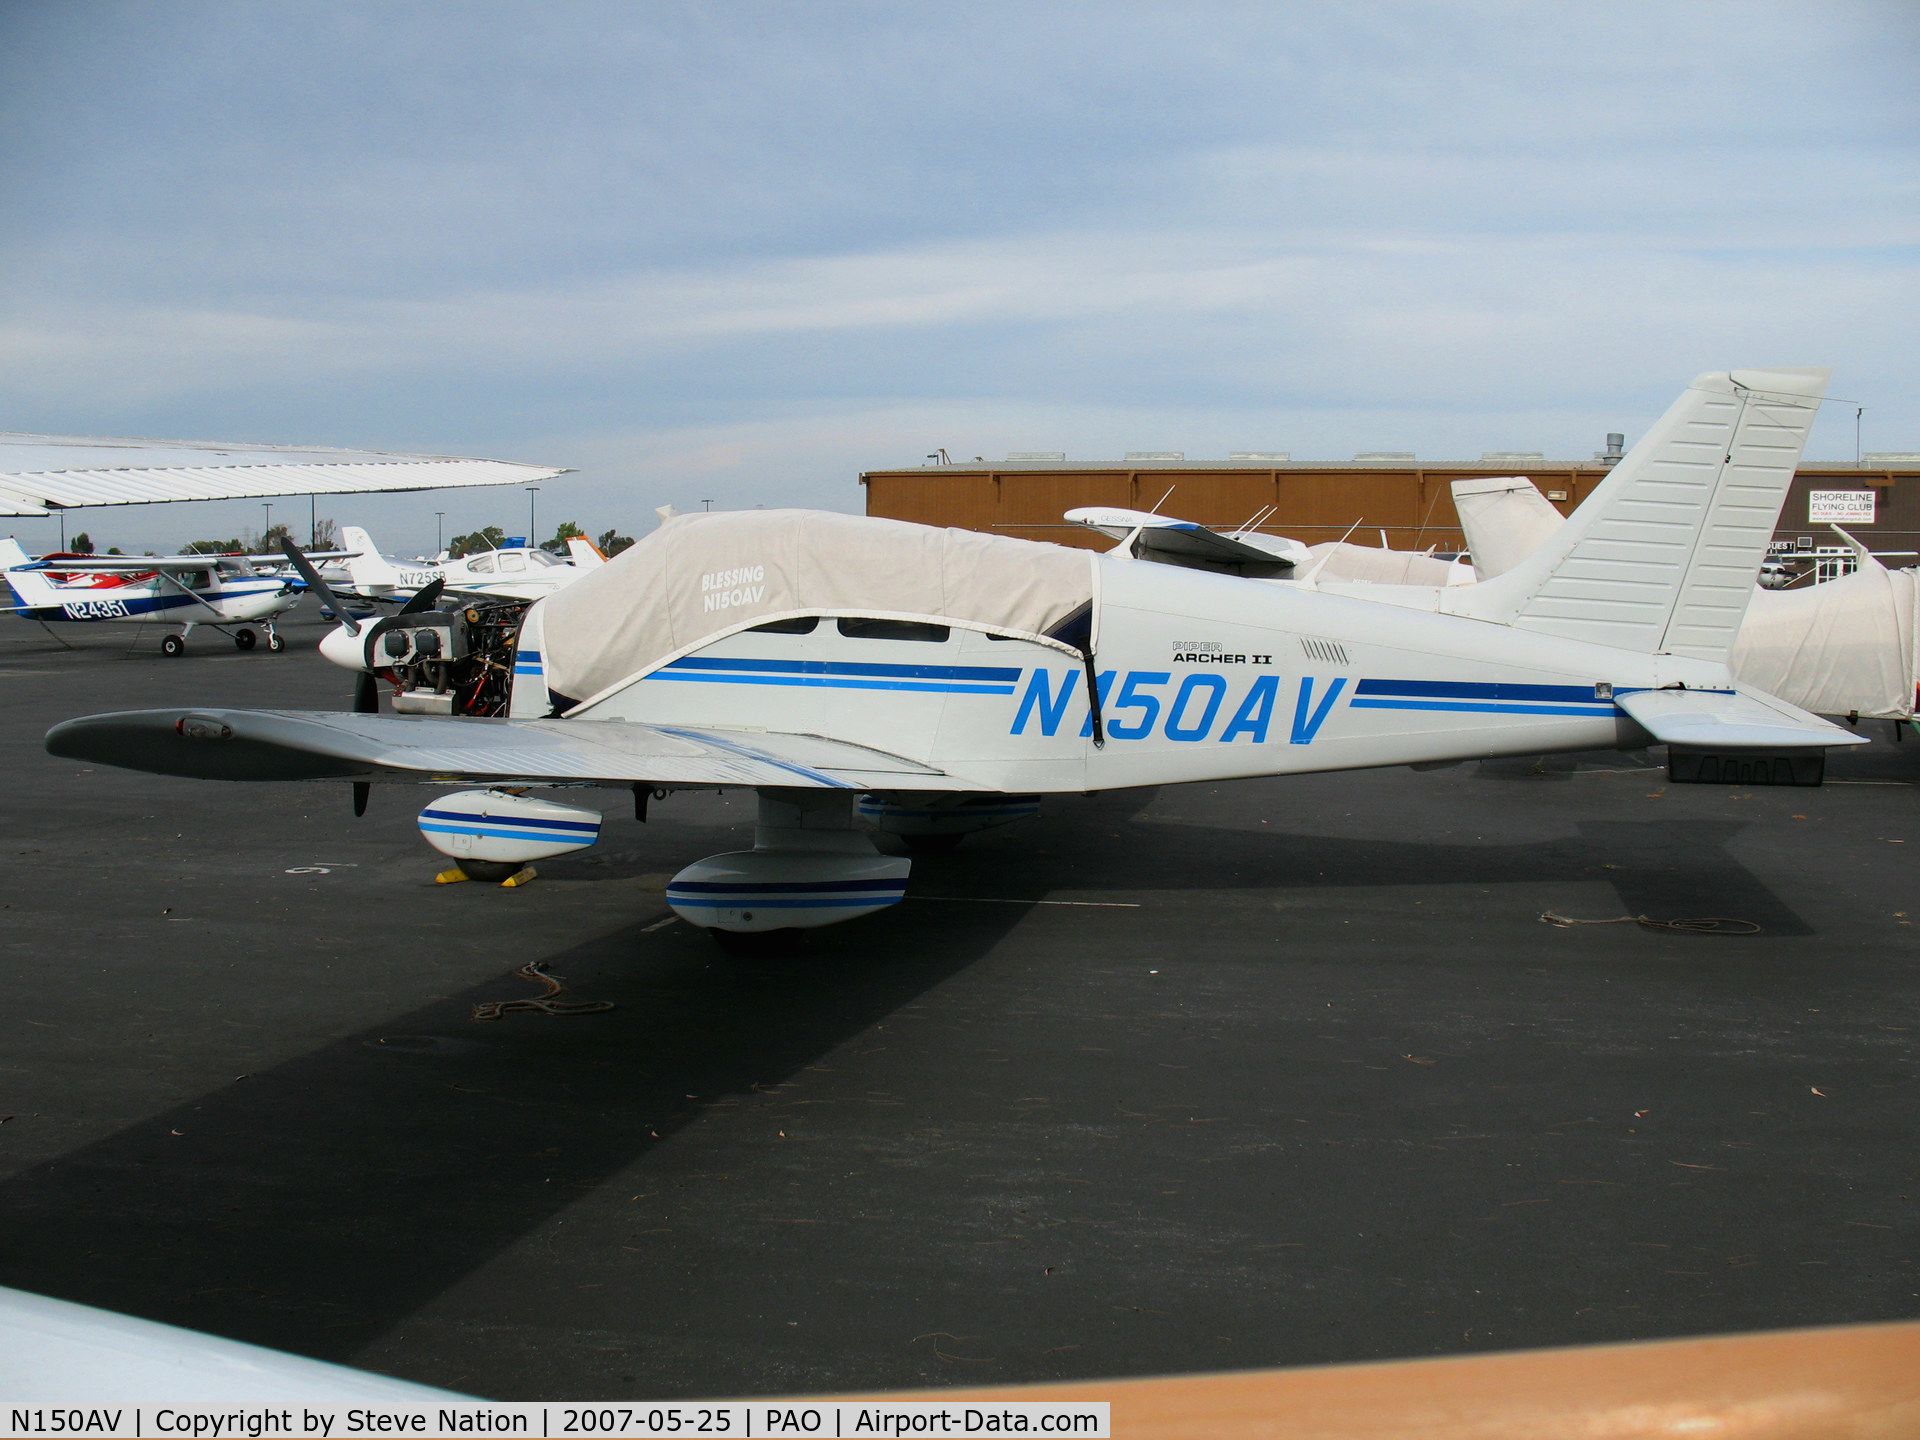 N150AV, 1985 Piper PA-28-181 C/N 28-8590037, 1985 Piper PA-28-181 under cover with cowl removed @ Palo Alto, CA